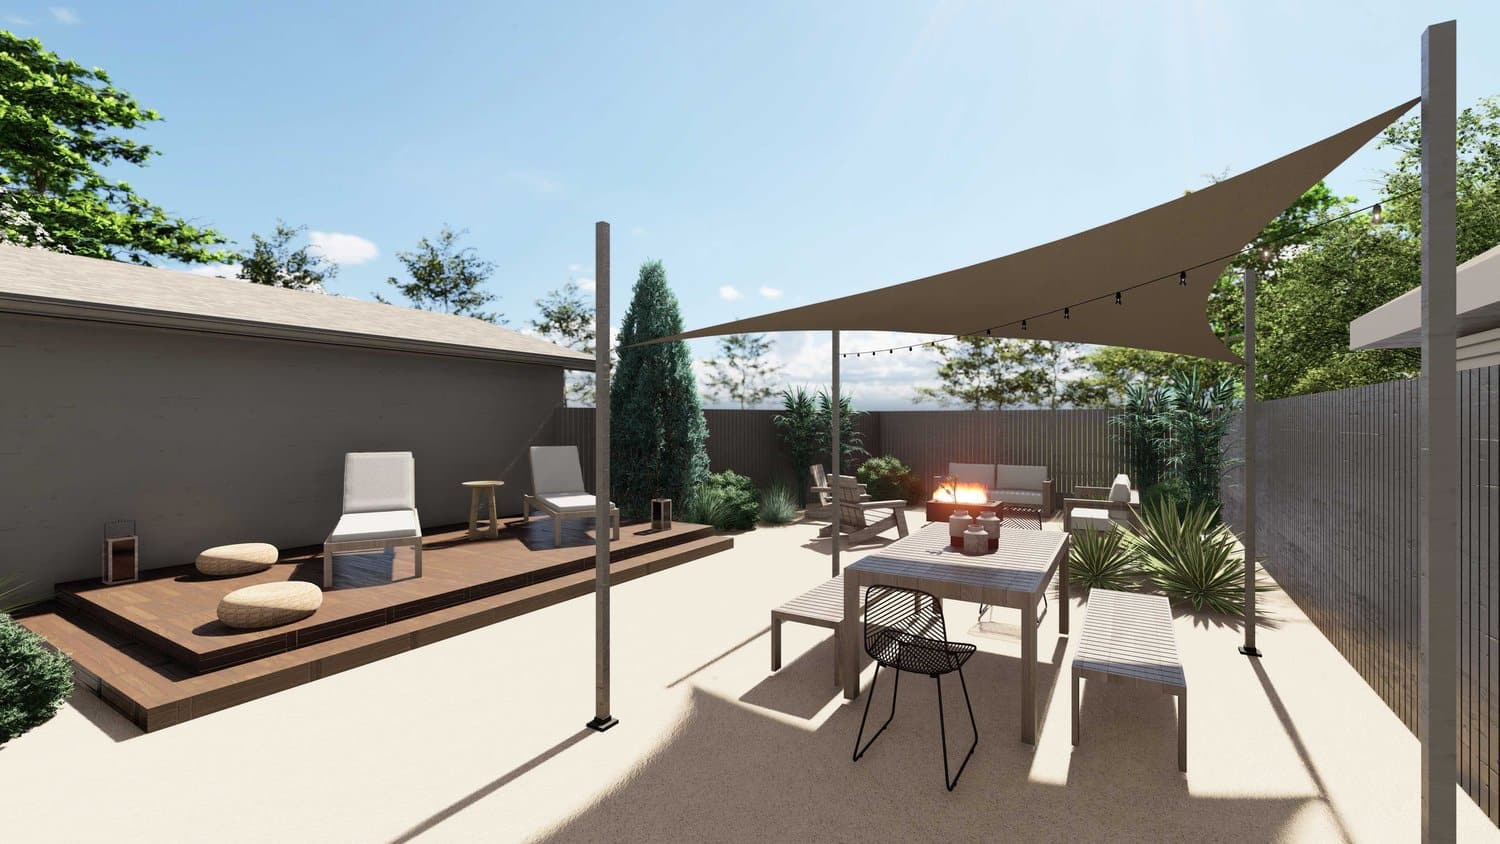 Park City fenced concrete floored backyard with seating area with triangle sun shade sail covering, deck patio seating area and fire pit seating area in the background